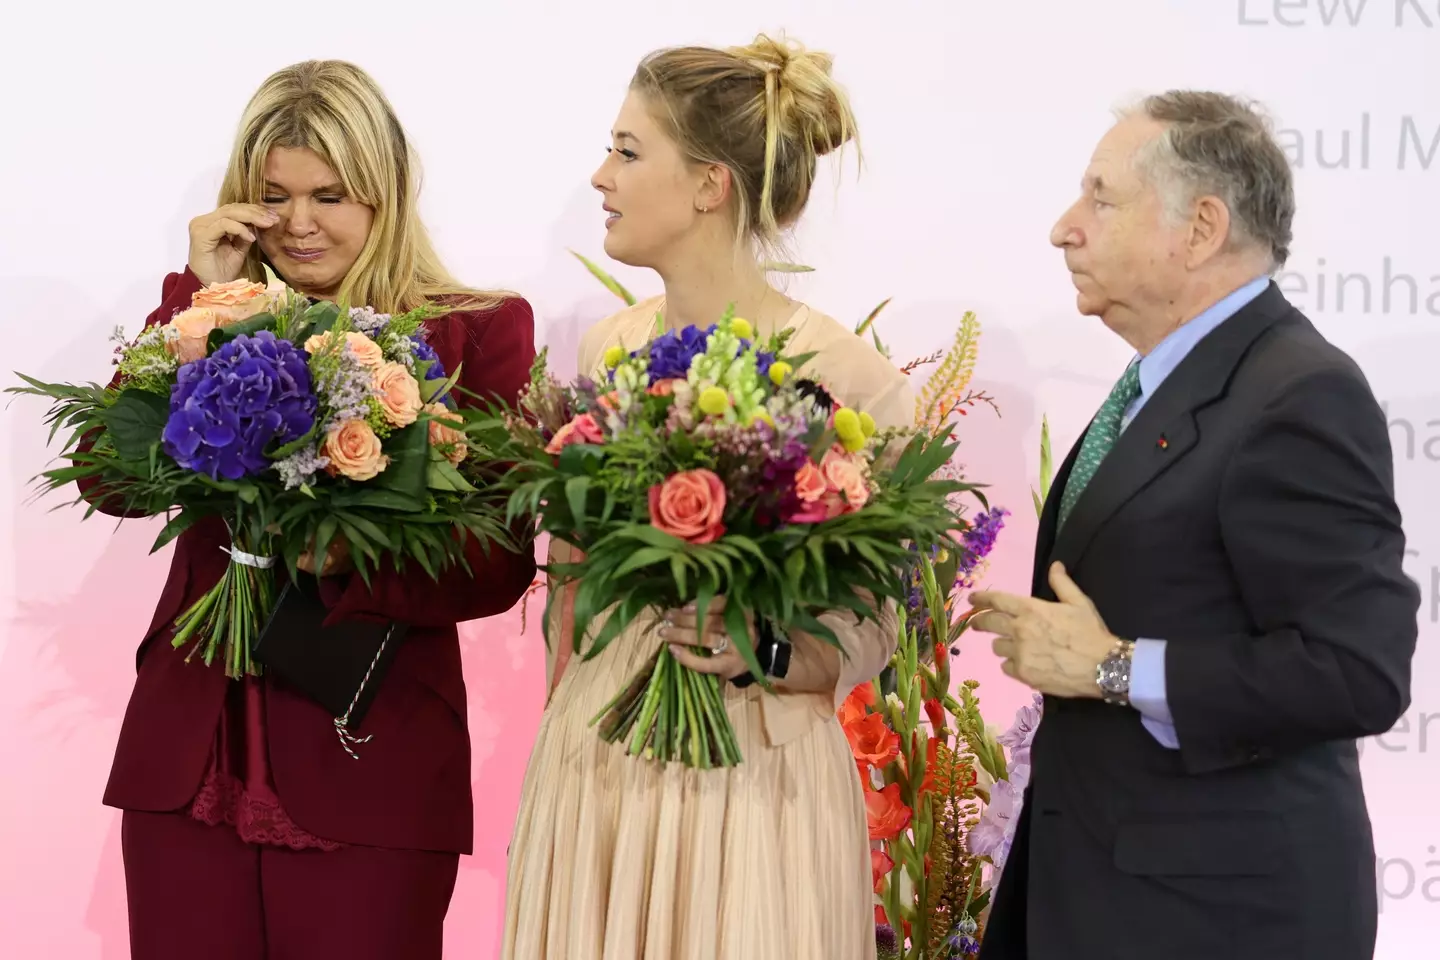 Corinna Schumacher broke down in tears while accepting an award on her husband's behalf with her daughter Gina-Marie and Ferrari chief Jean Totd.